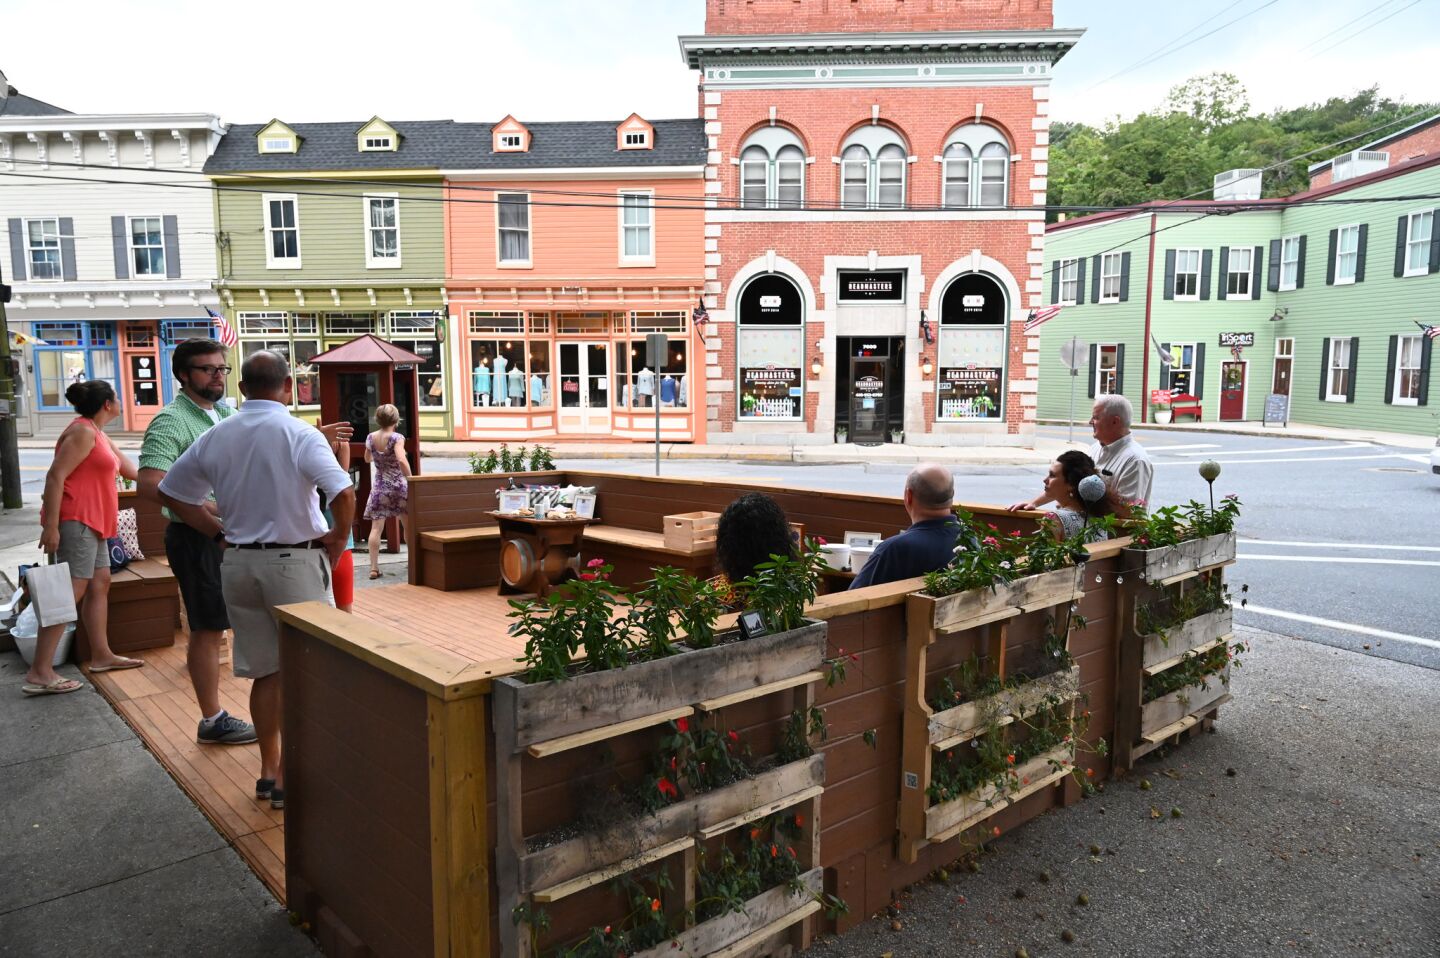 People gather to celebrate the opening of the new parklet, at the intersection of Main Street and Sandosky Road, in Sykesville on August 20.